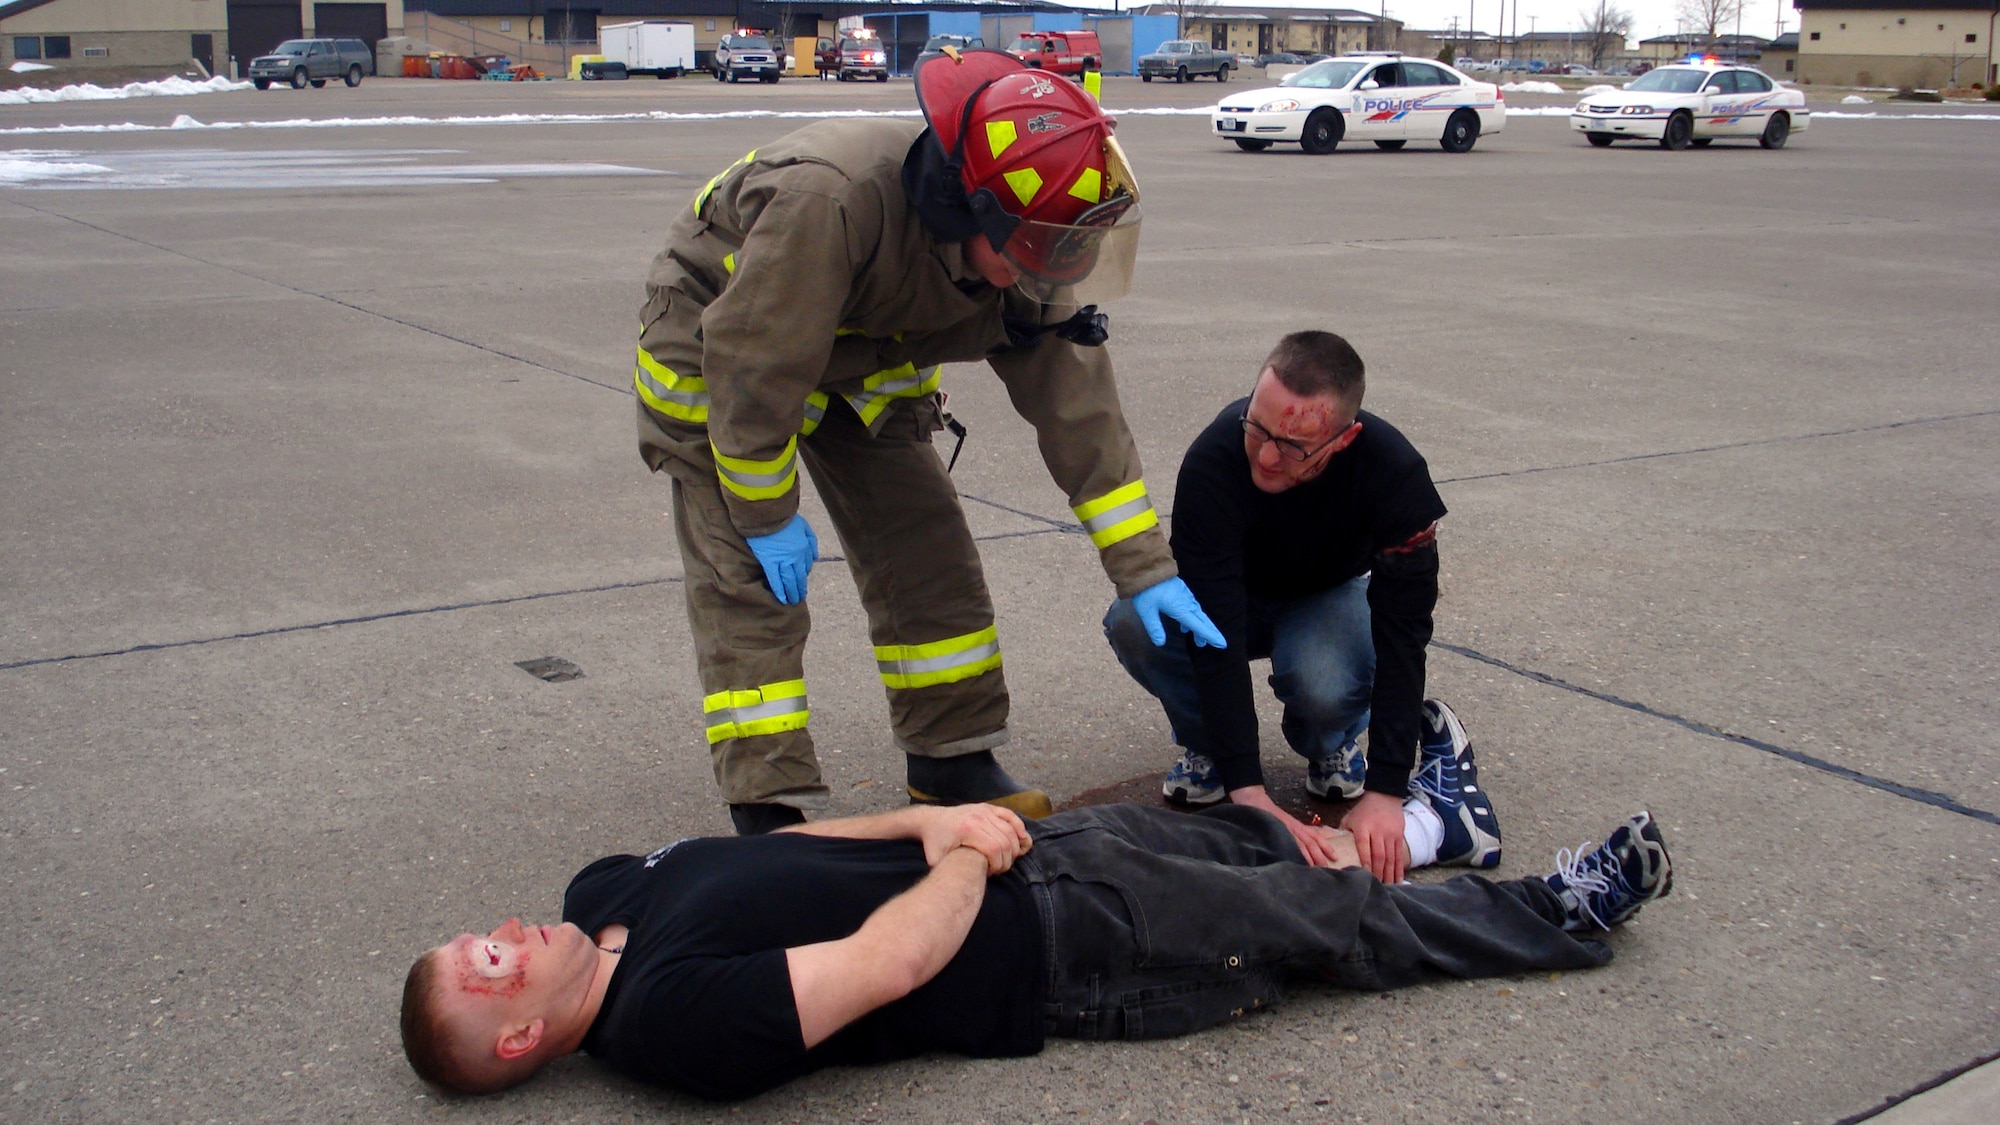 A member of the Malmstrom Fire Department and a volunteer "victim" assess the injuries of another "victim" during an exercise scenario in April. Both "victims" were moulaged prior to the start of the exercise to simulate a more realistic training environment. (U.S. Air Force courtesy photo)